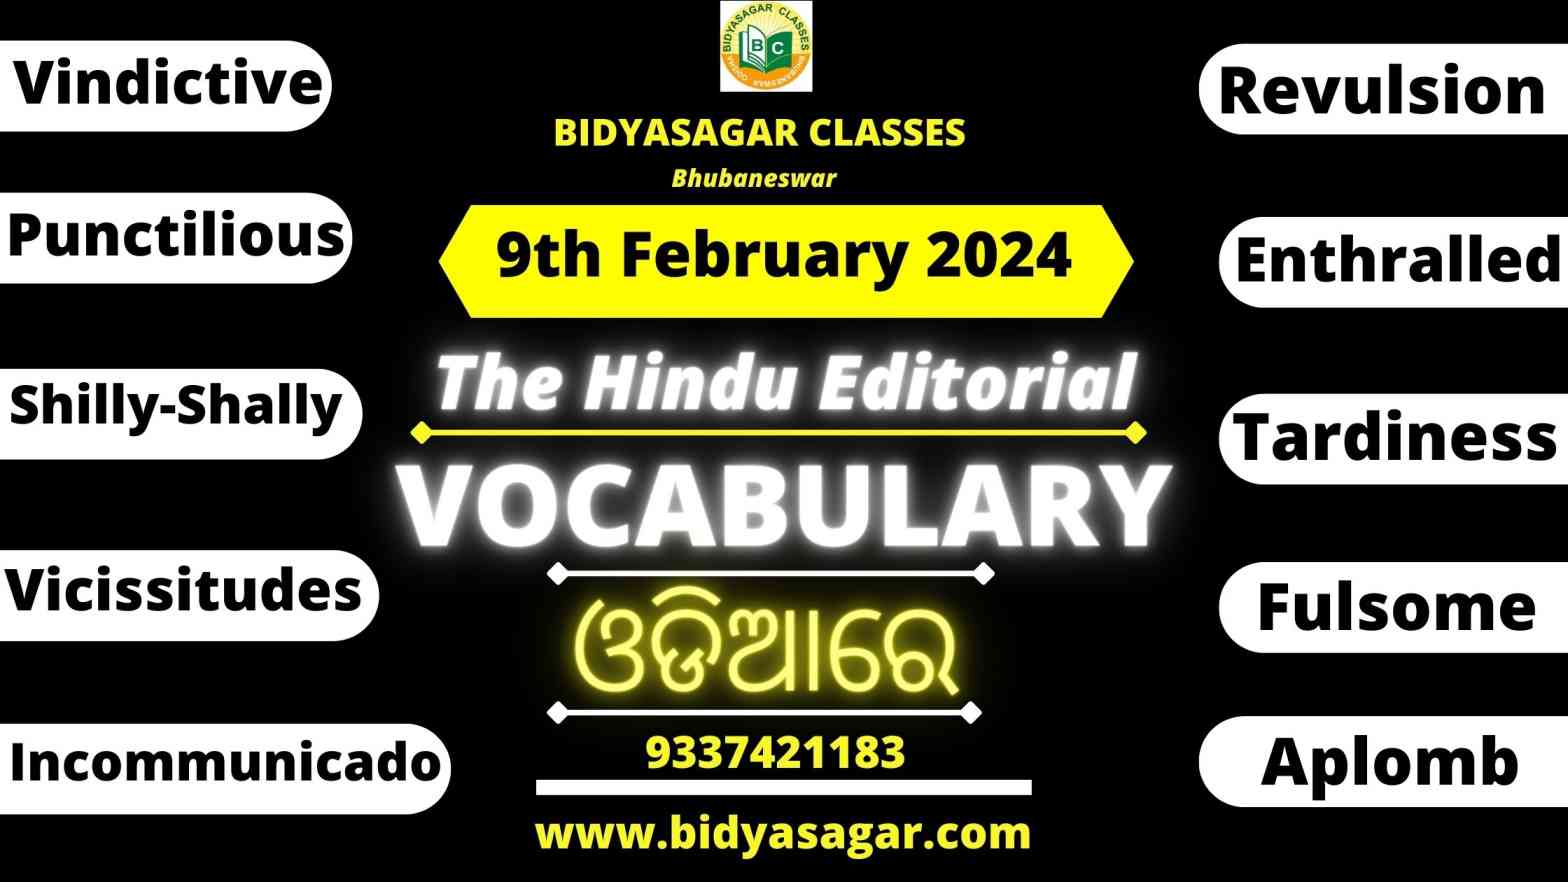 The Hindu Editorial Vocabulary of 9th February 2024